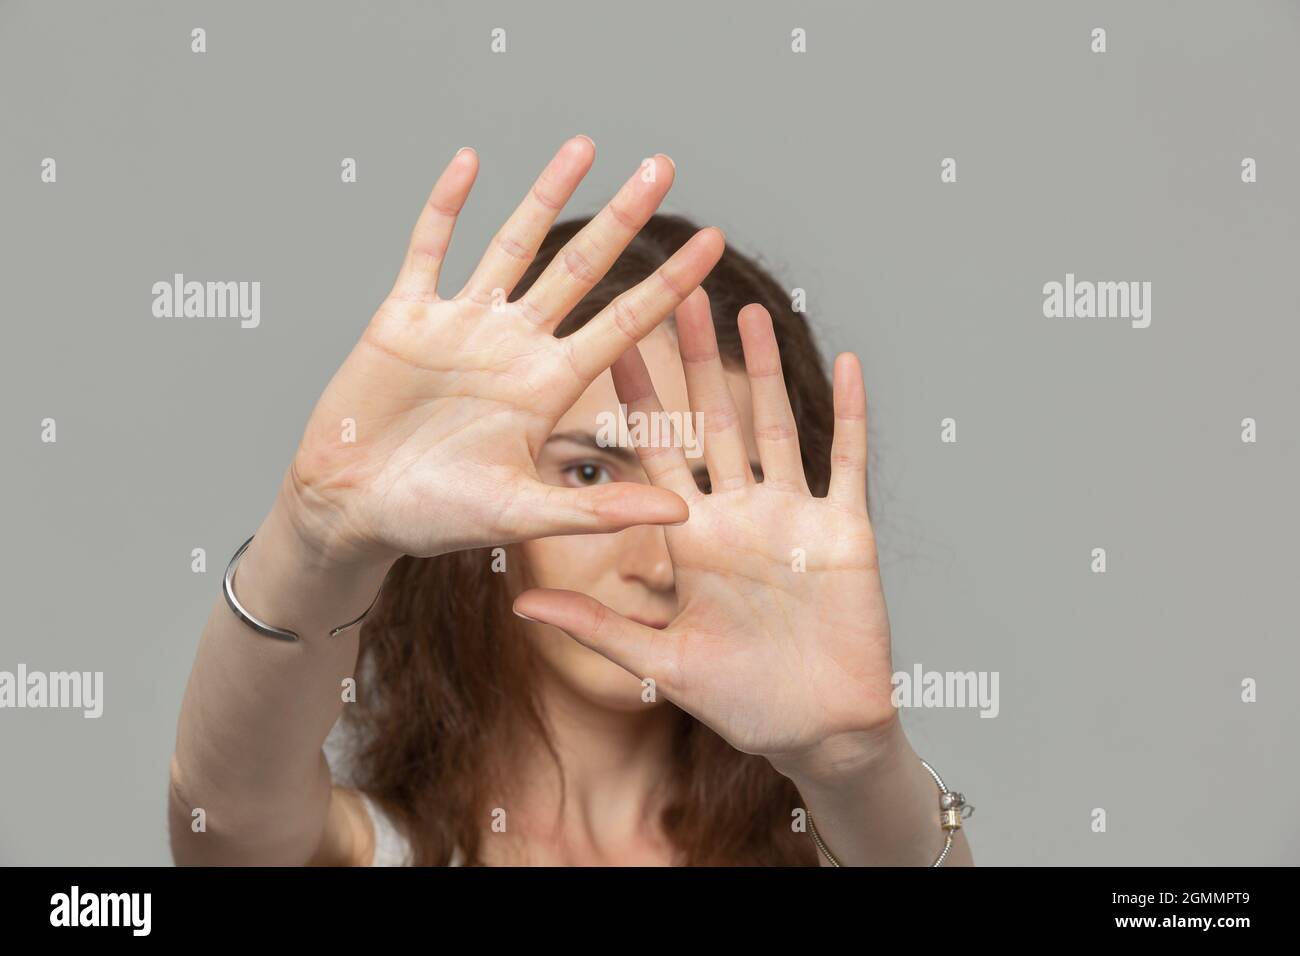 Portrait woman covering face with hands Stock Photo